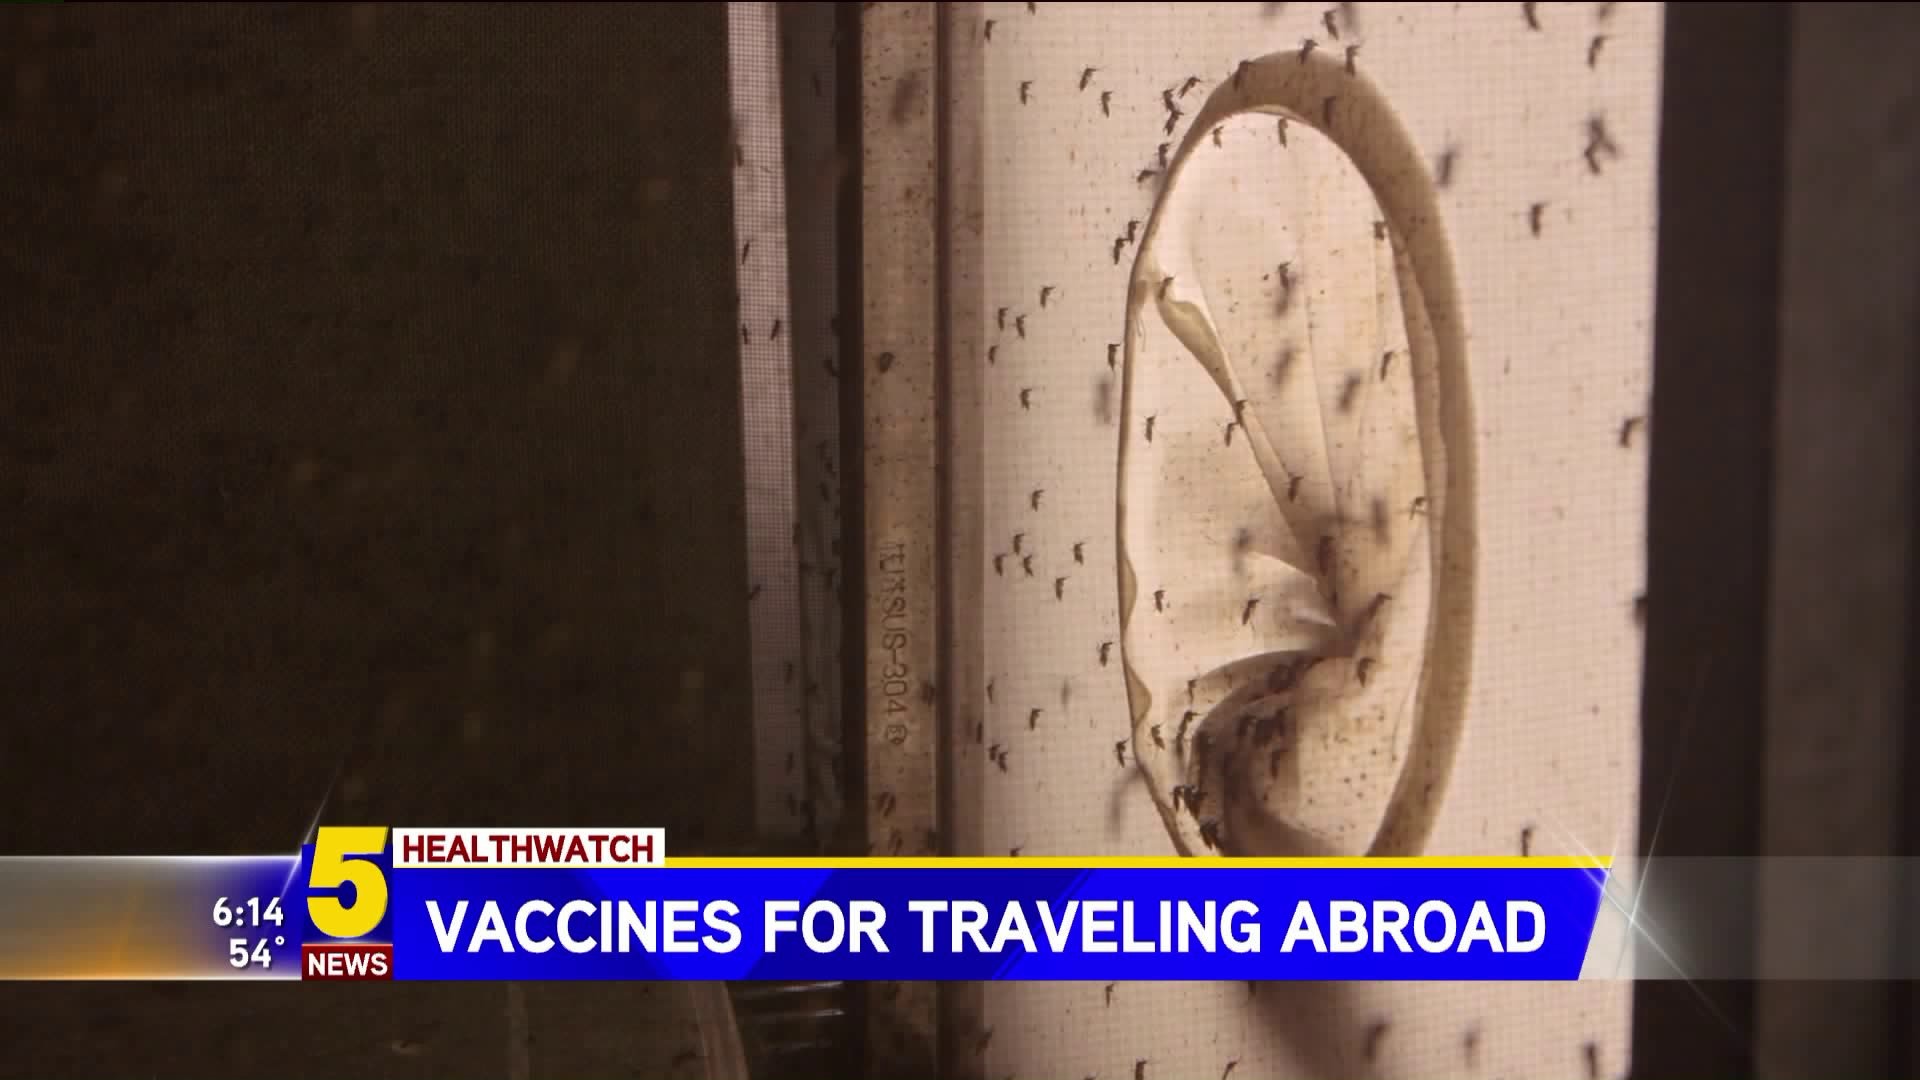 Vaccines For Traveling Abroad